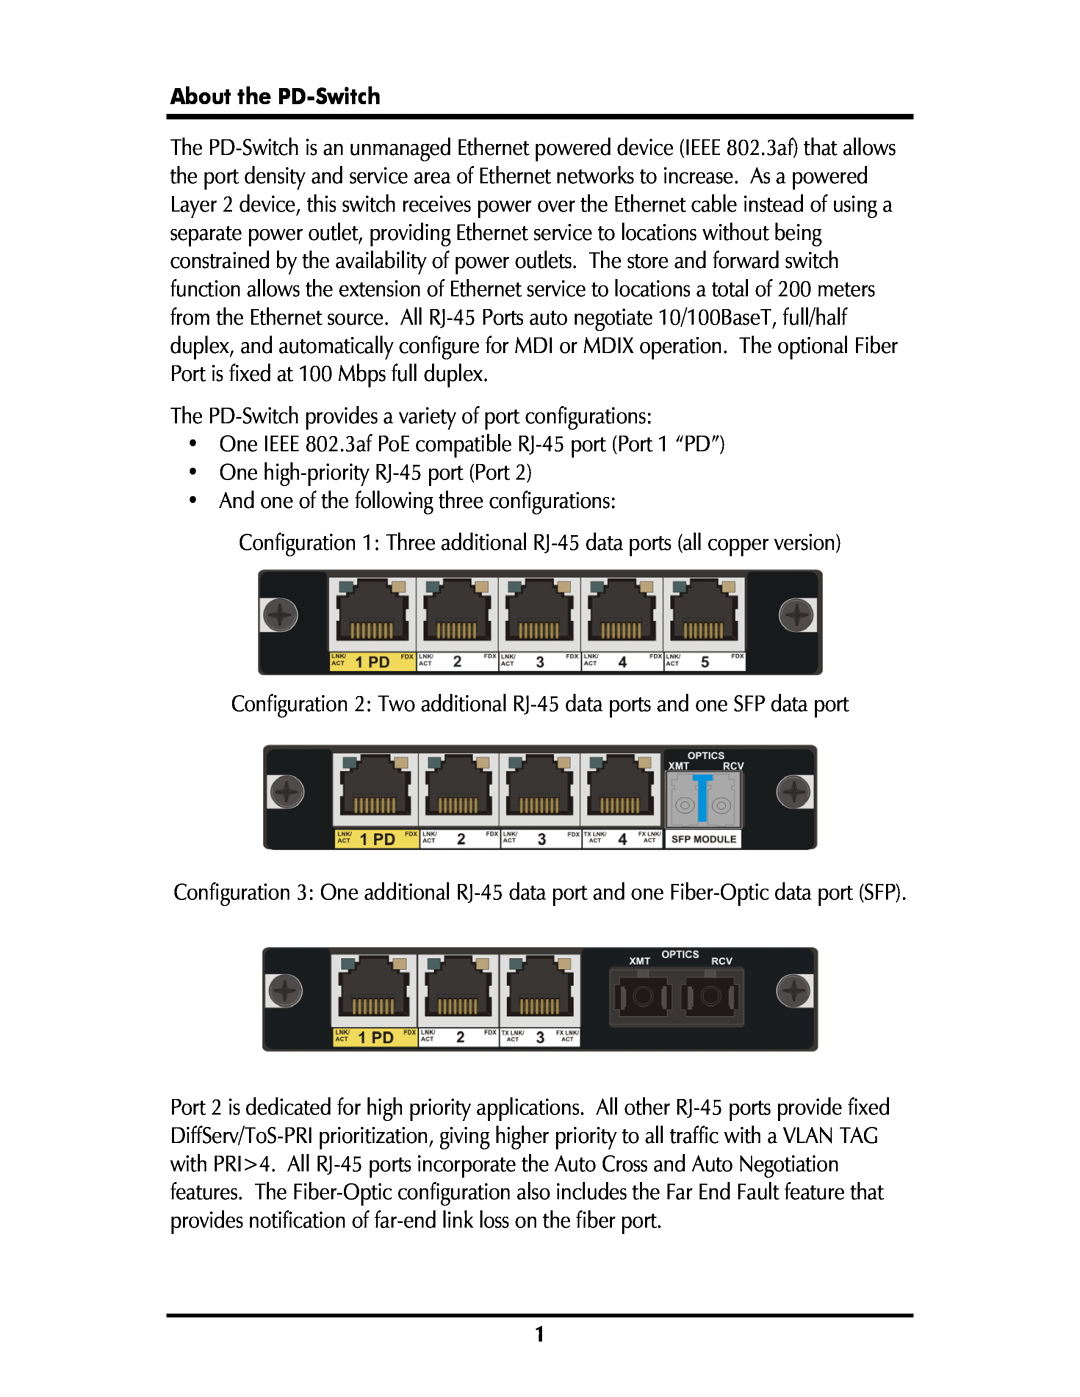 IMC Networks operation manual About the PD-Switch 